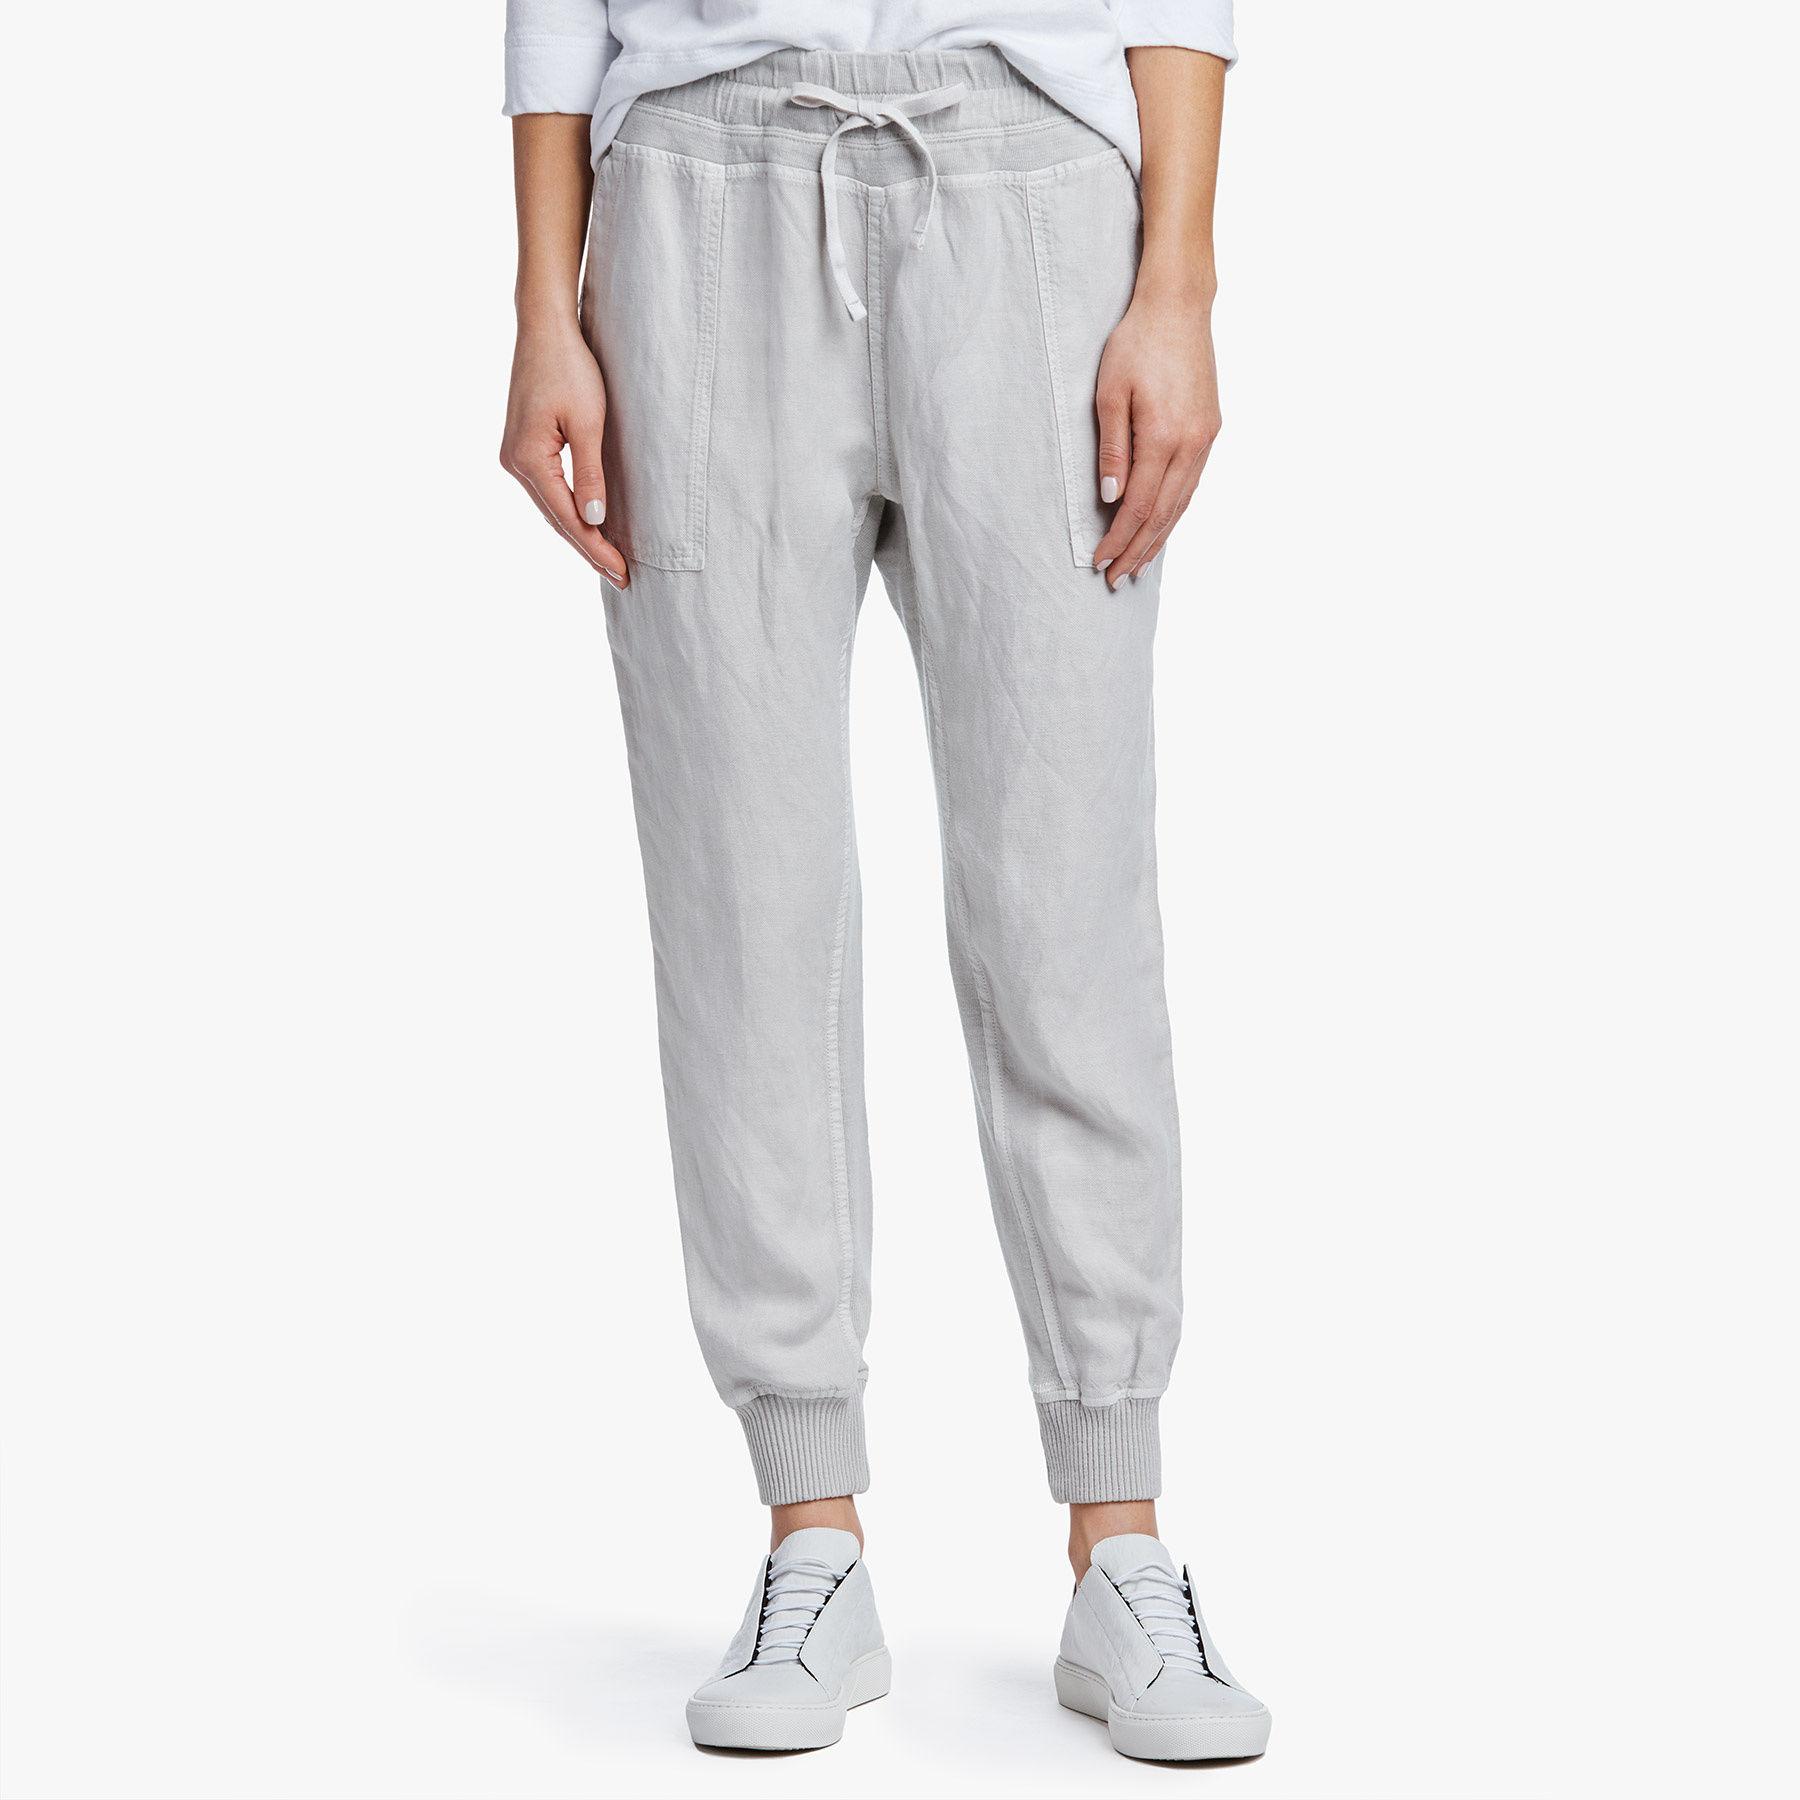 James Perse Canvas Linen Relaxed Pant in Silver (Metallic) - Lyst